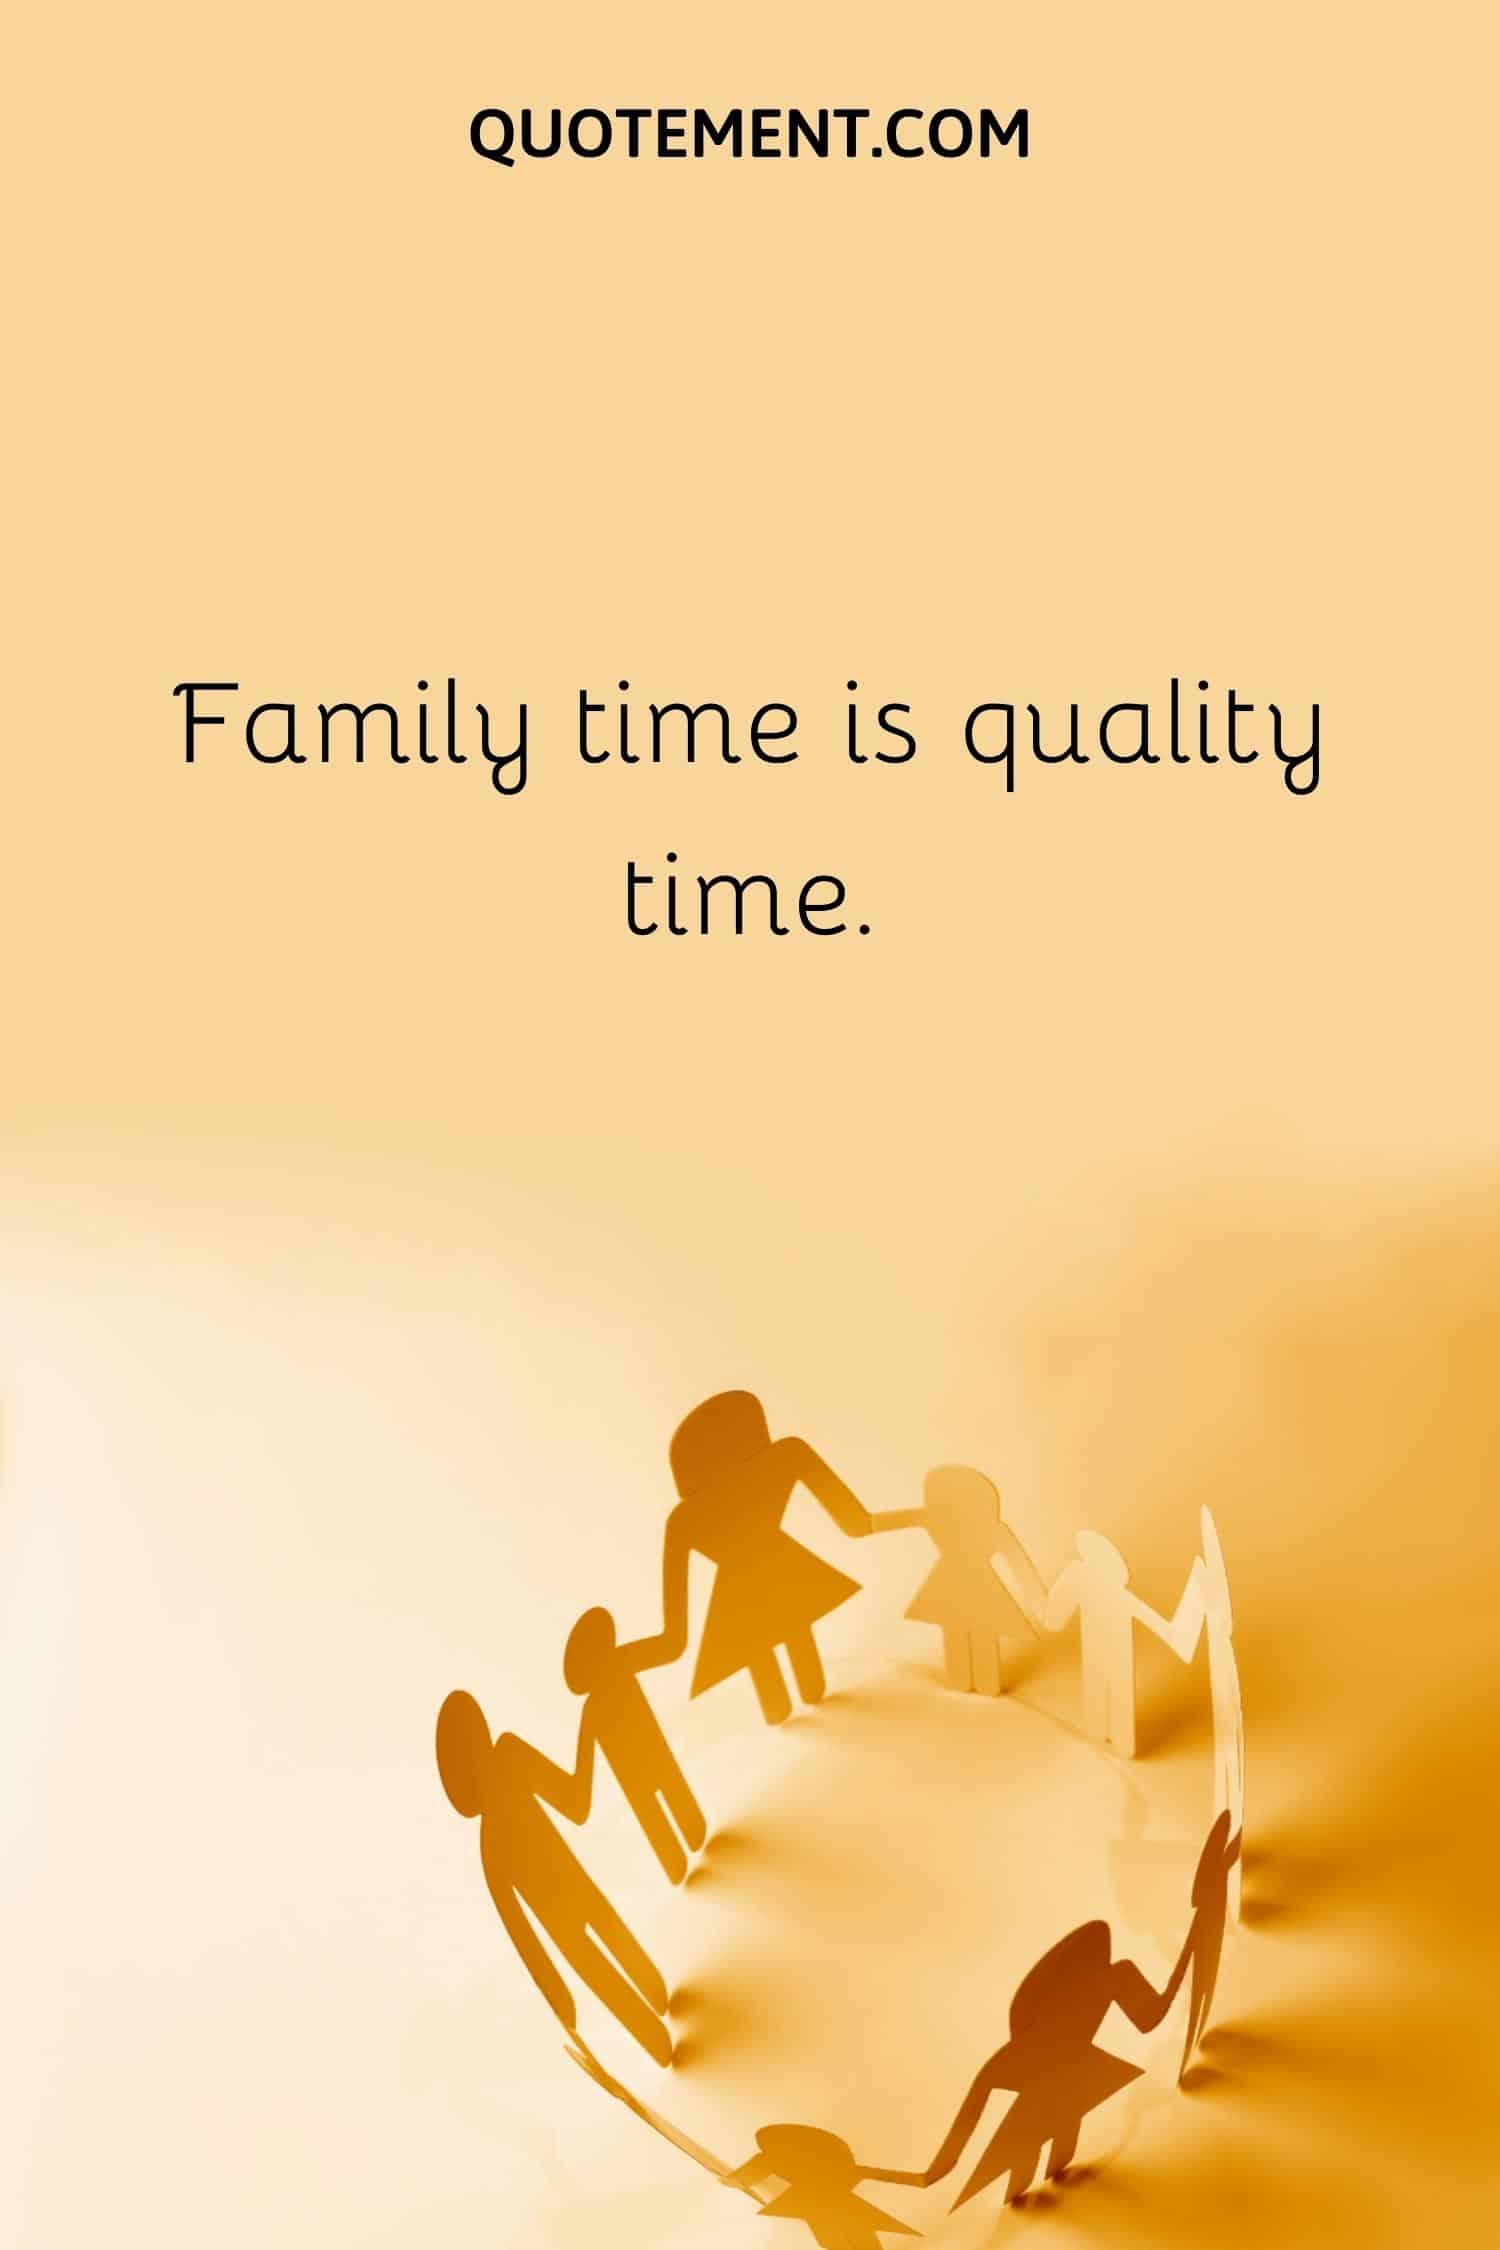 Family time is quality time